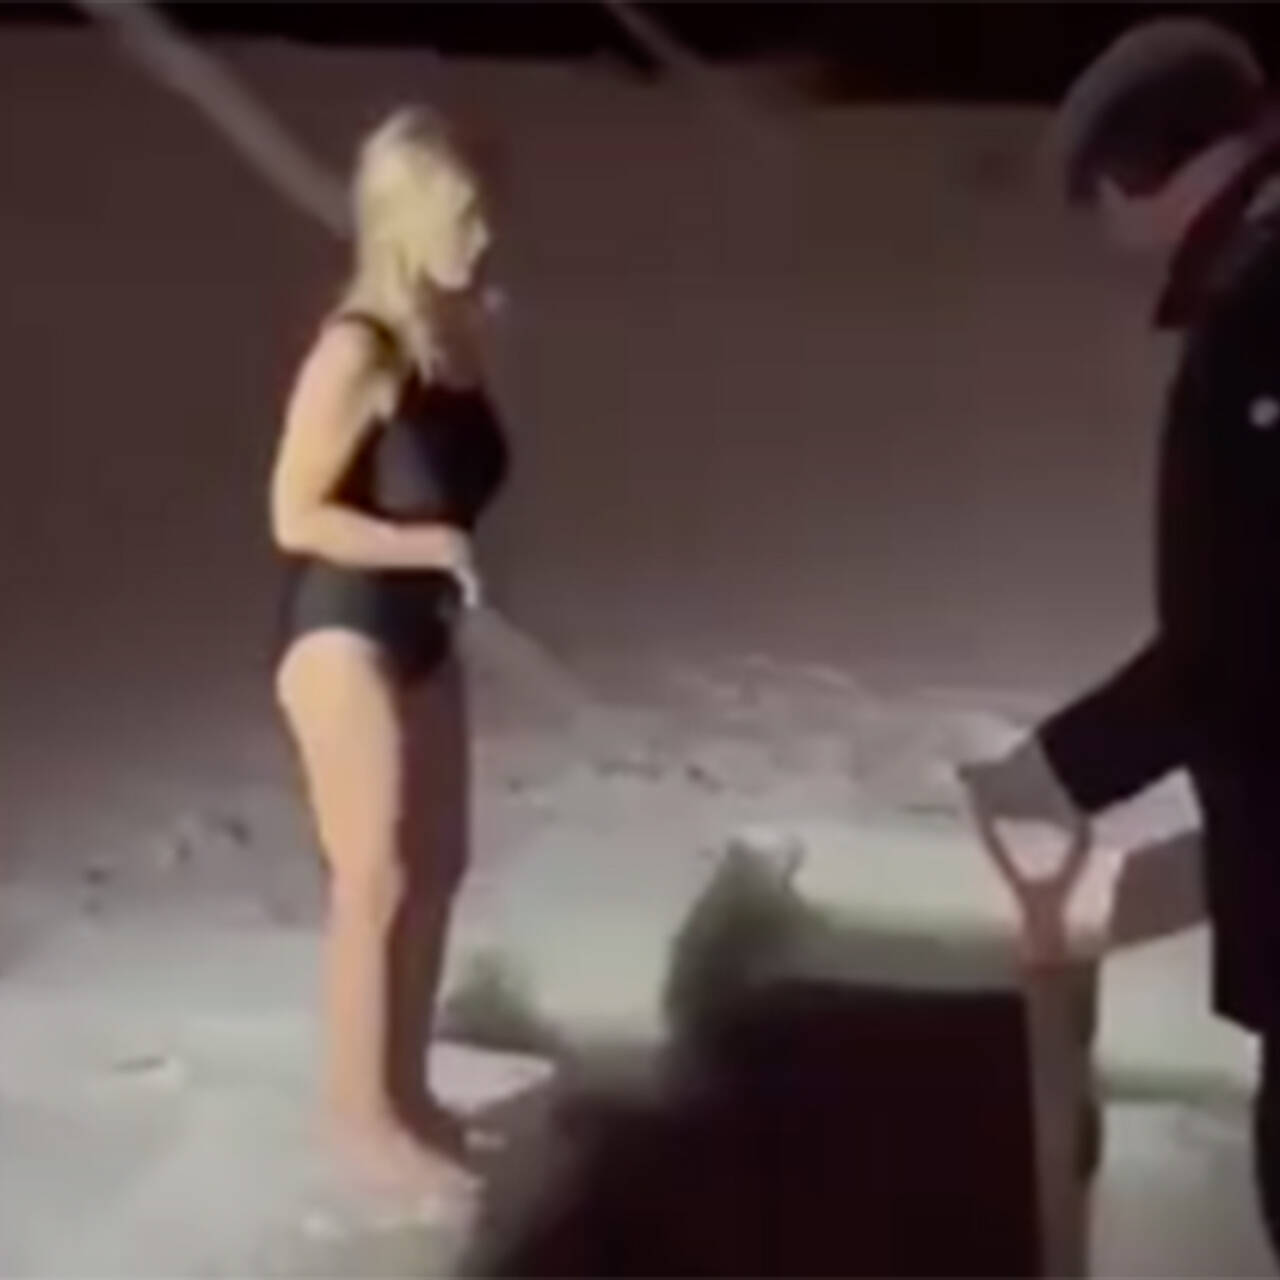 Russian Woman Disappears Under Ice